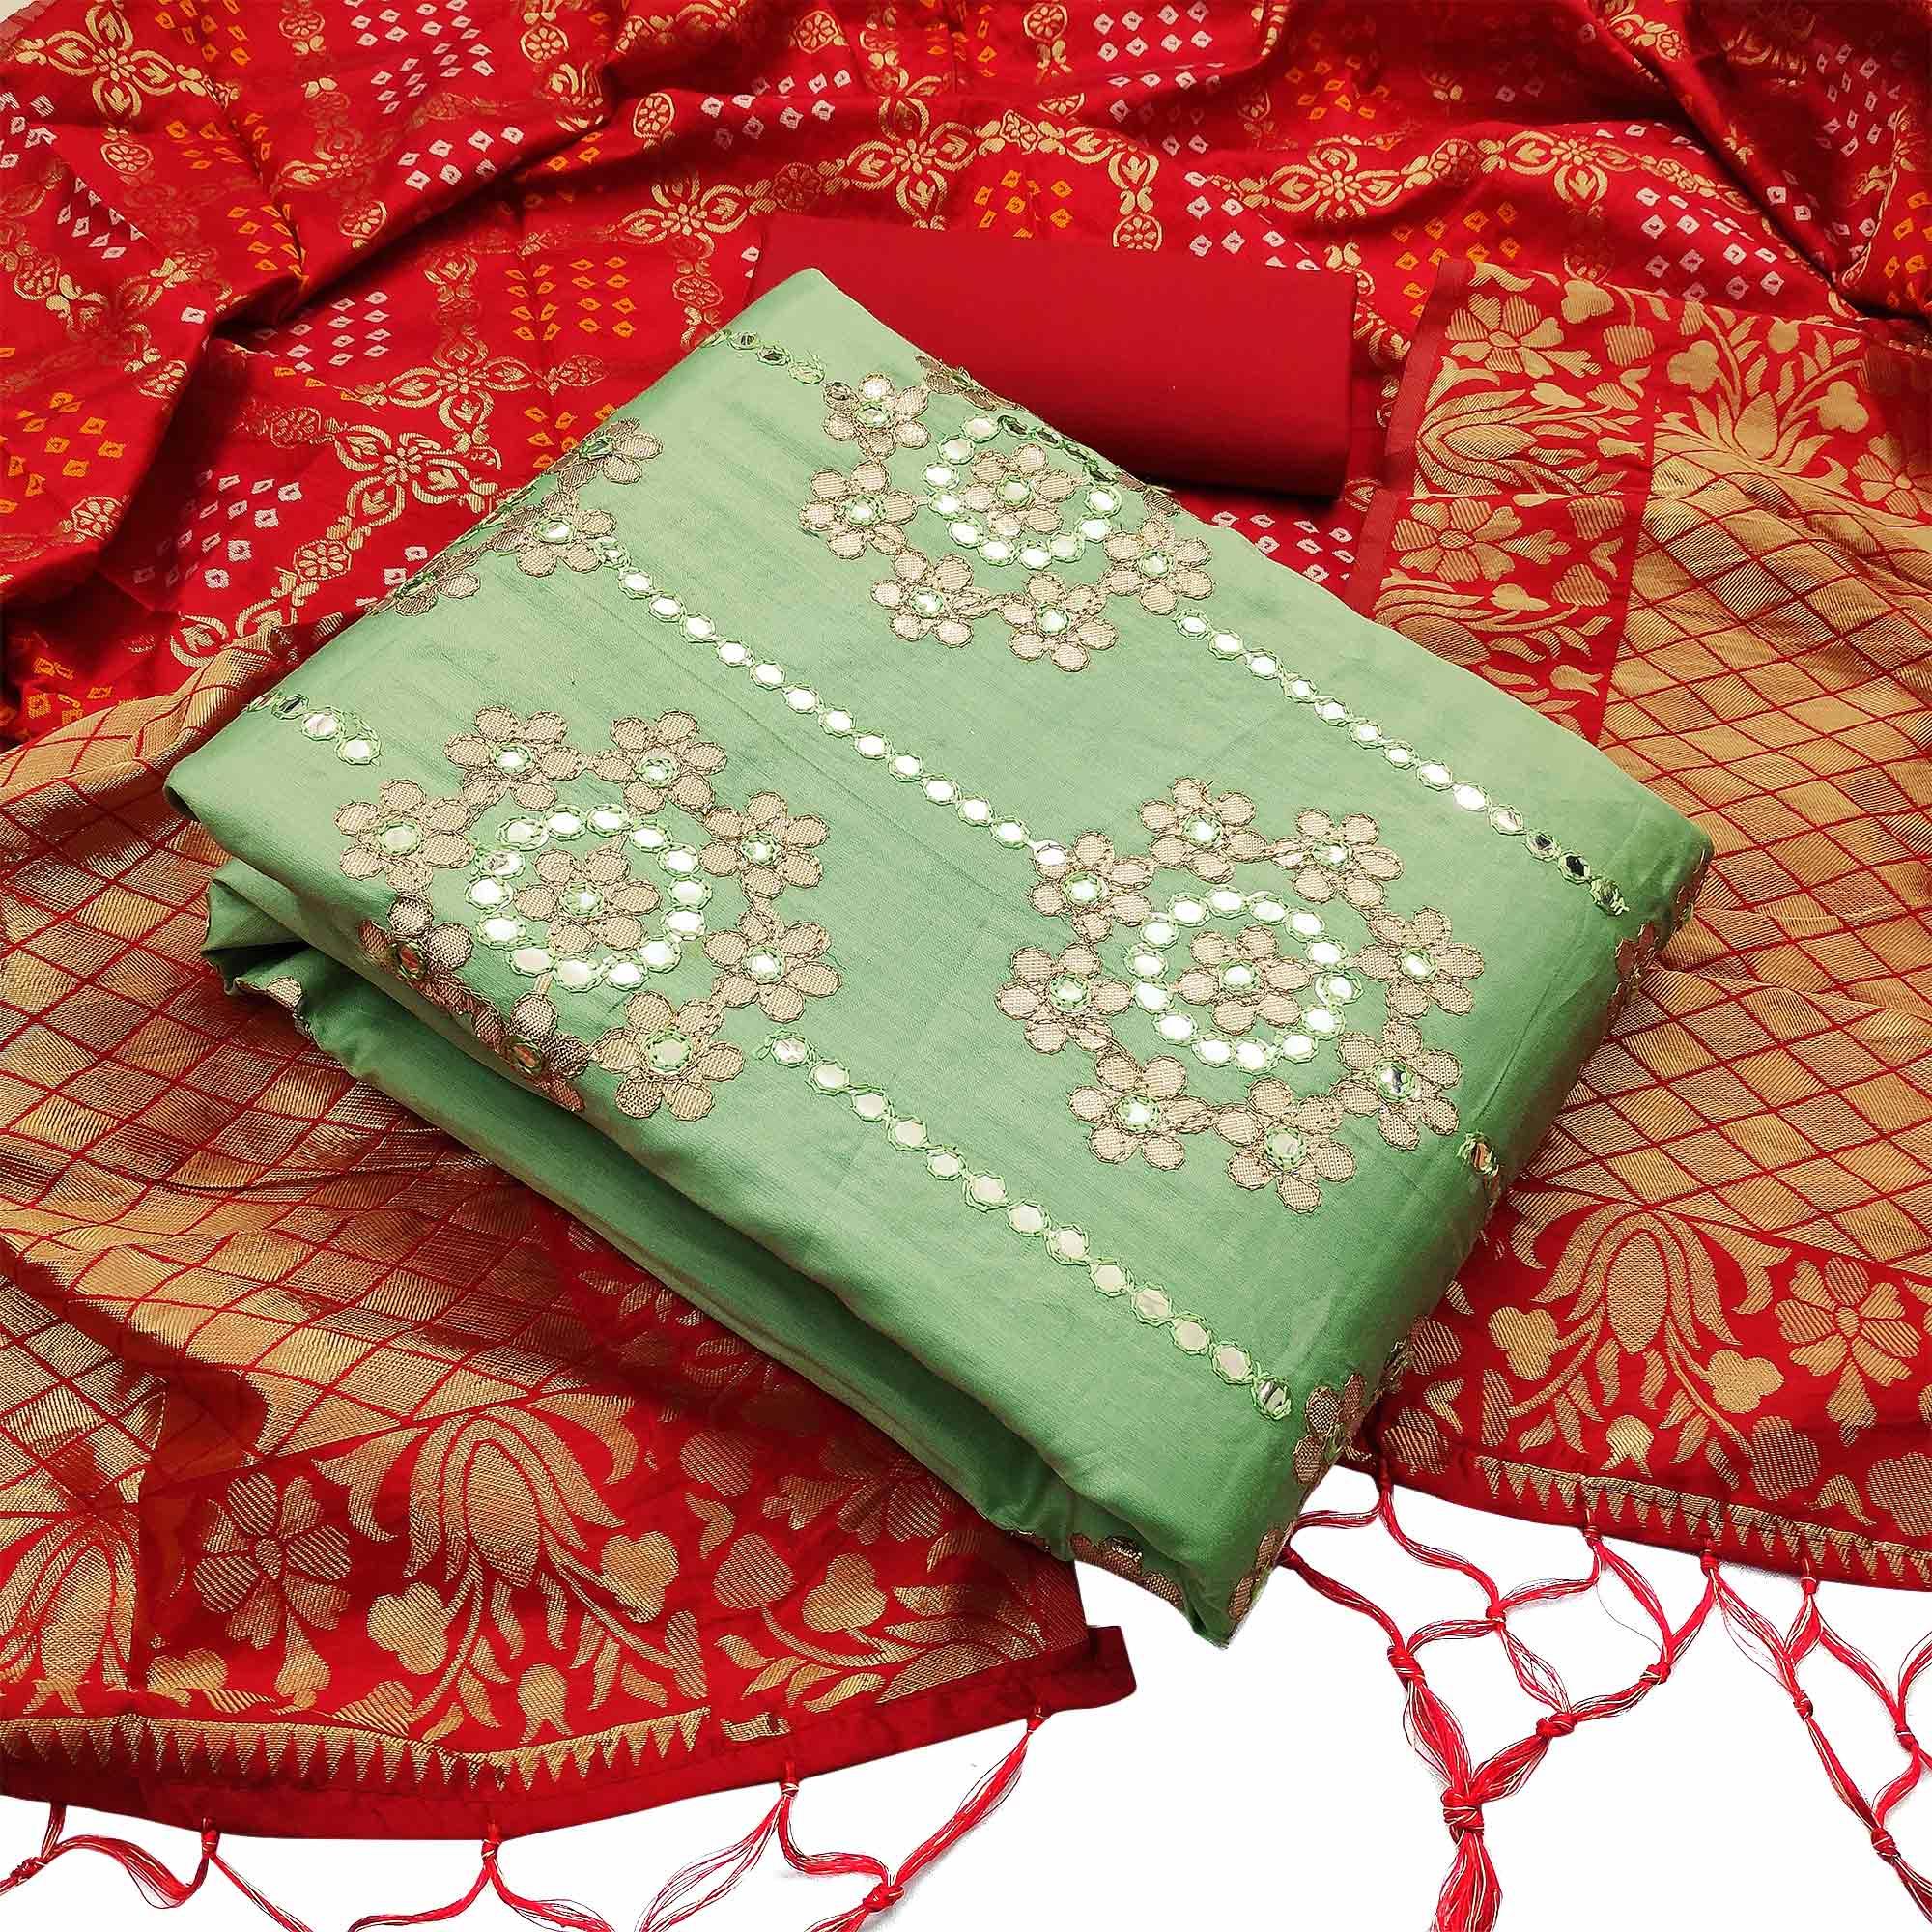 Adorable Green Colored Festive Wear Embroidered Heavy Cotton Dress Material - Peachmode